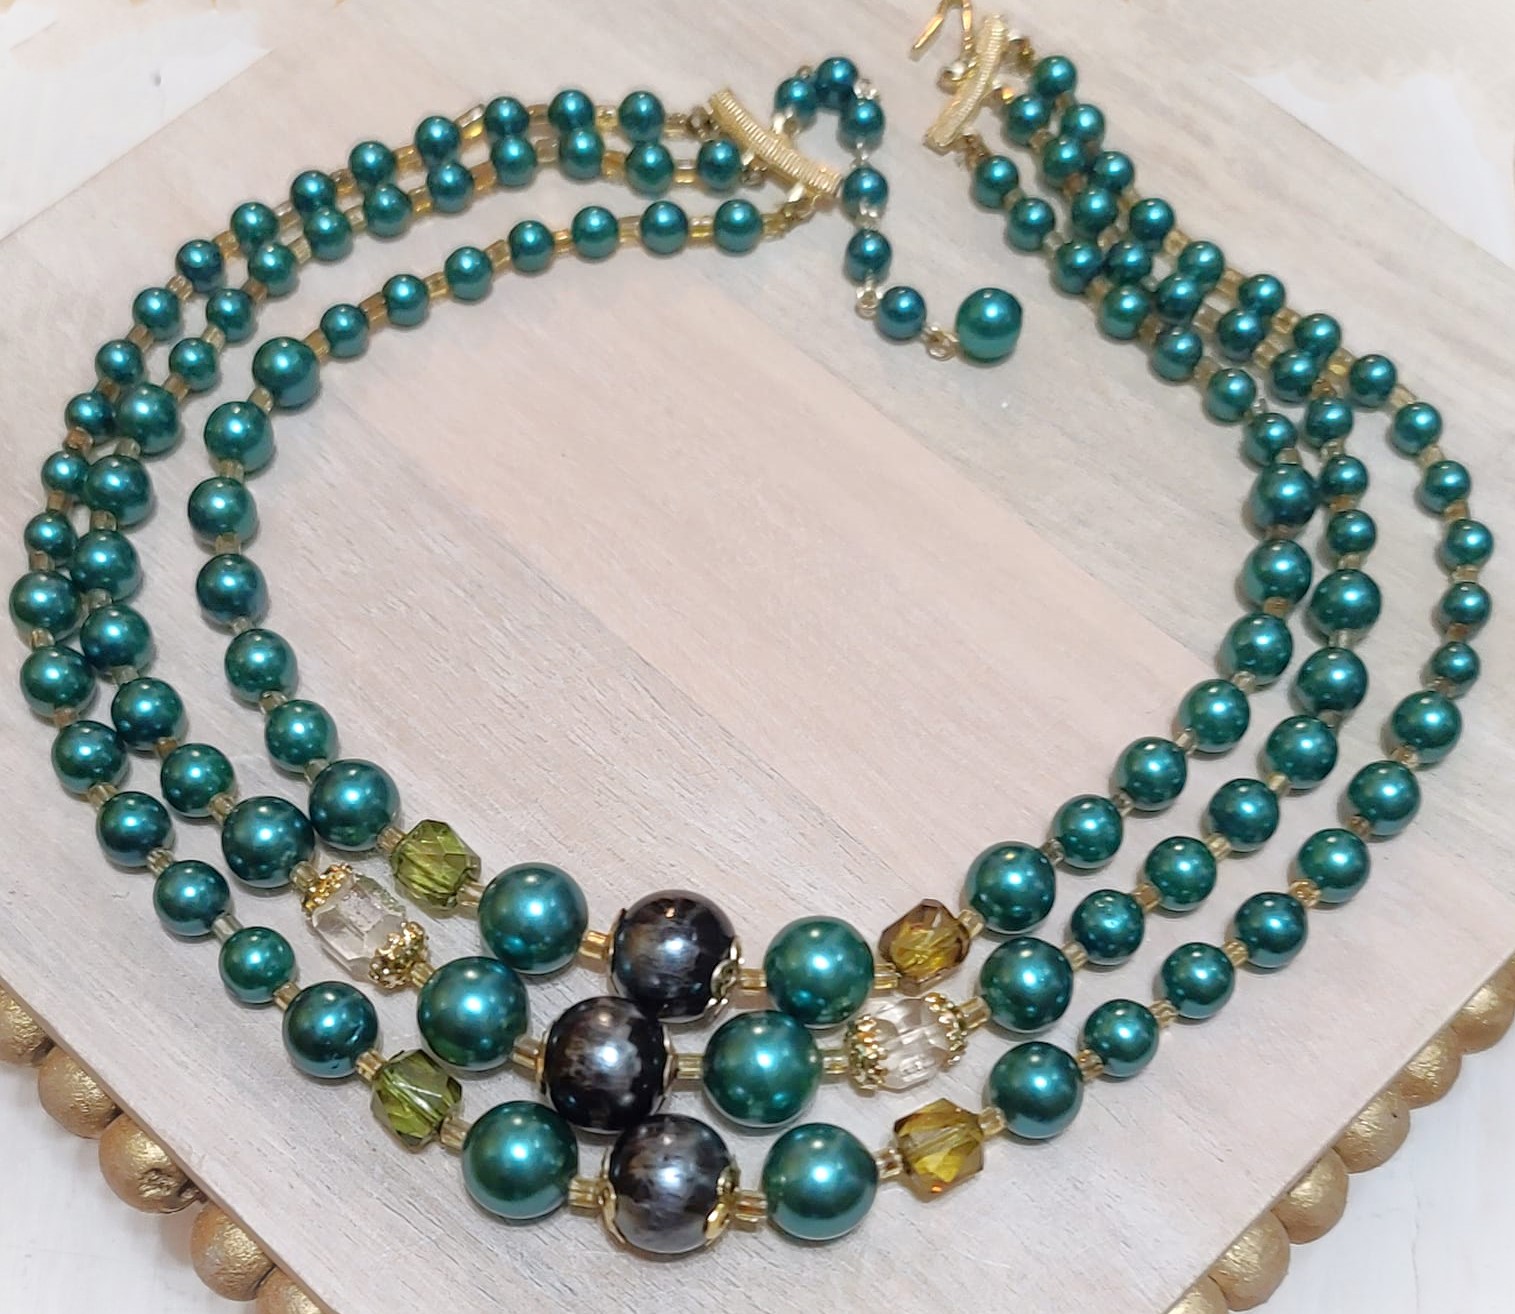 Evergreen green and crystals 3 strand choker vintage necklace